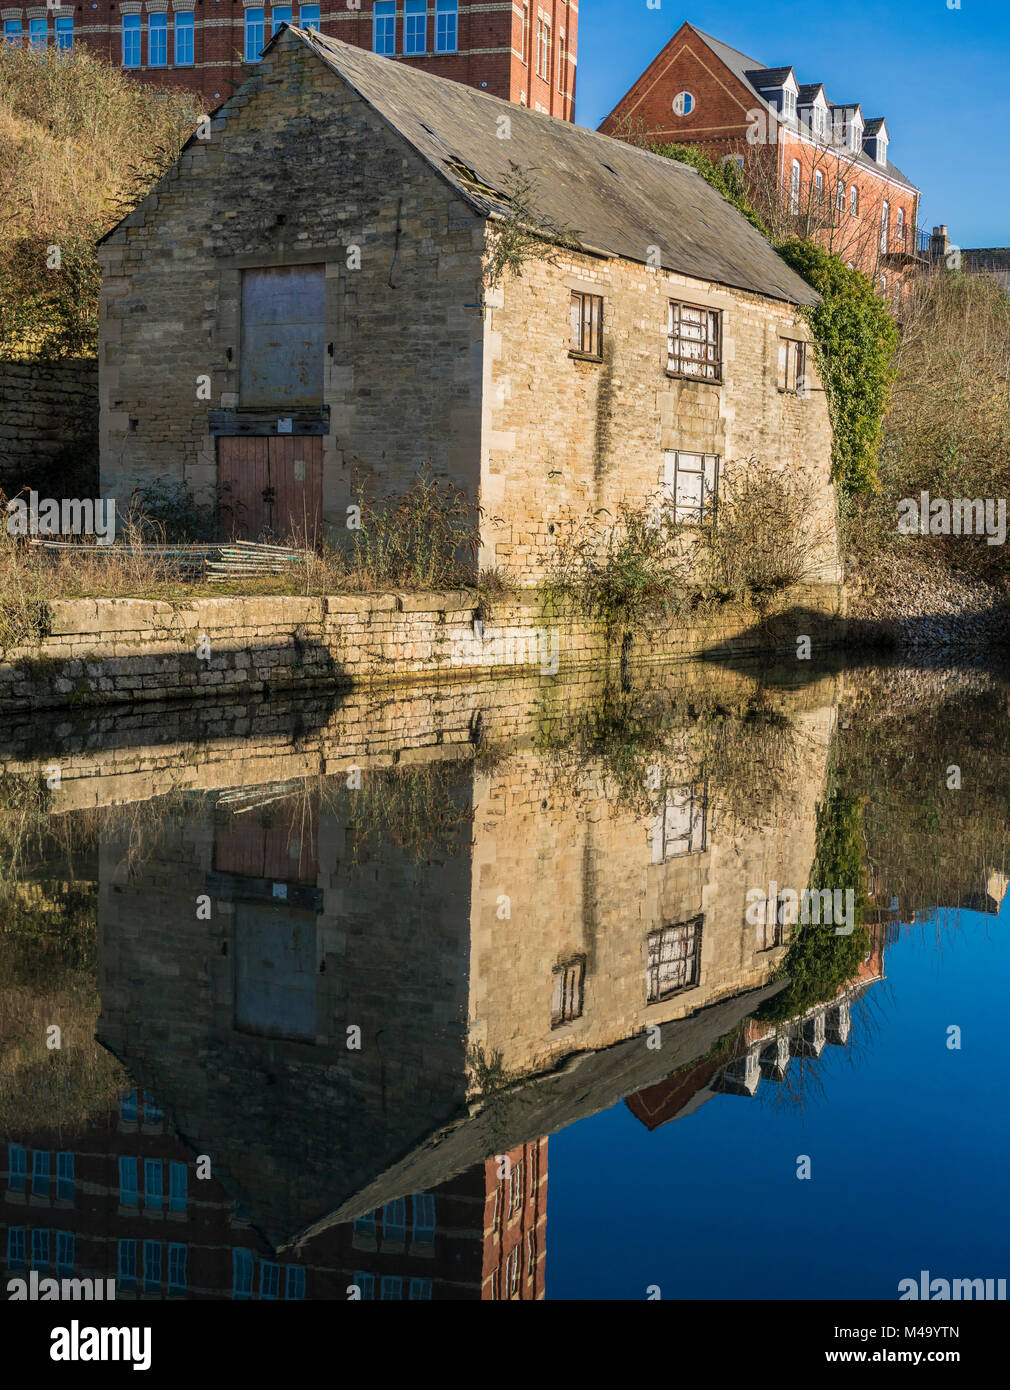 Old building reflecting on water in the restored Stroudwater Canal in Stroud, Gloucestershire, UK Stock Photo